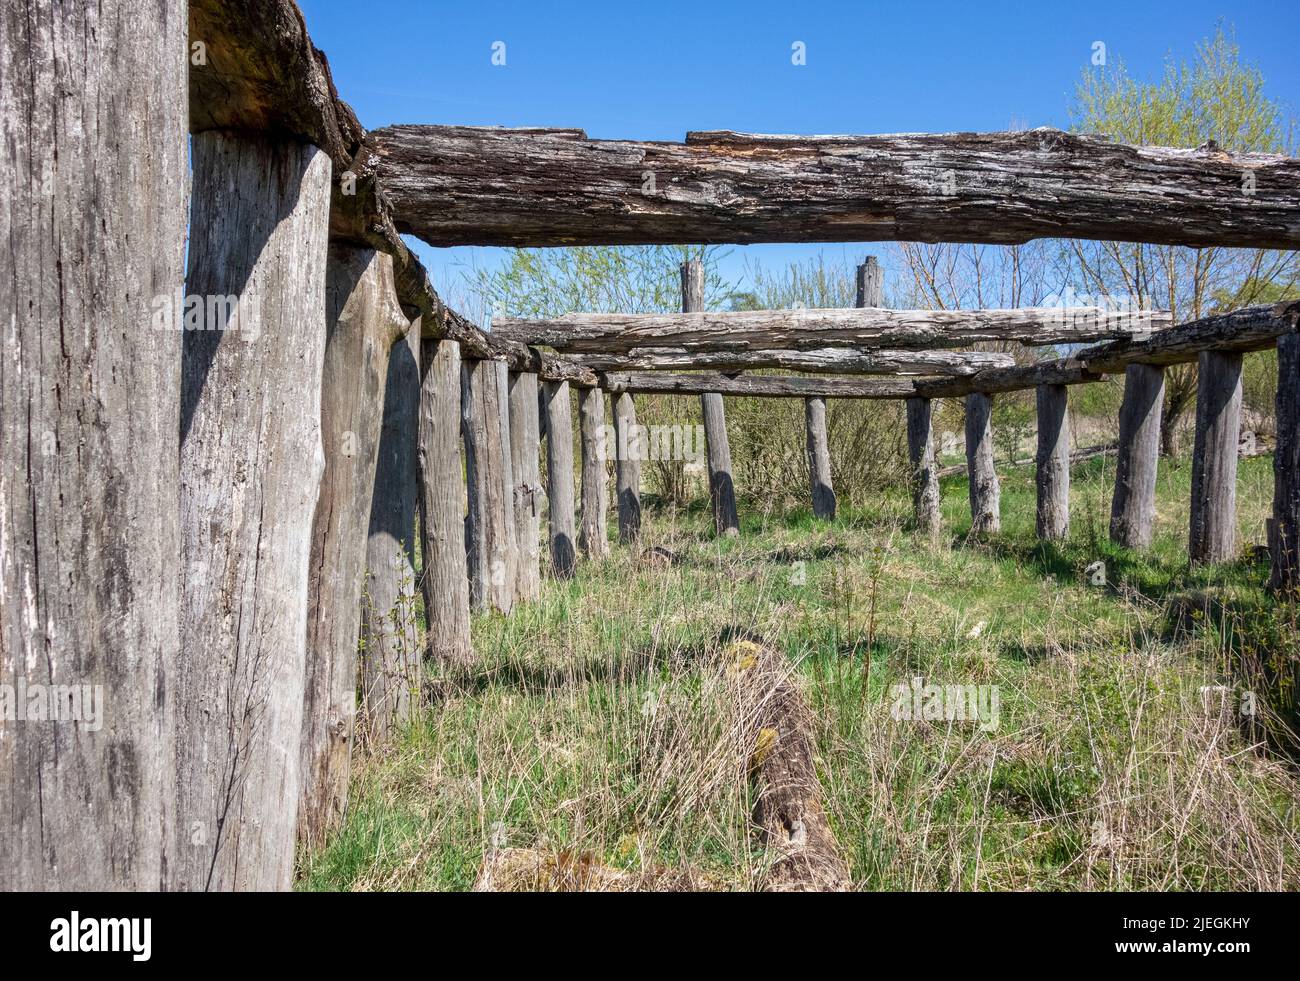 Rundown medieval wooden building remains in sunny ambiance at early spring time Stock Photo